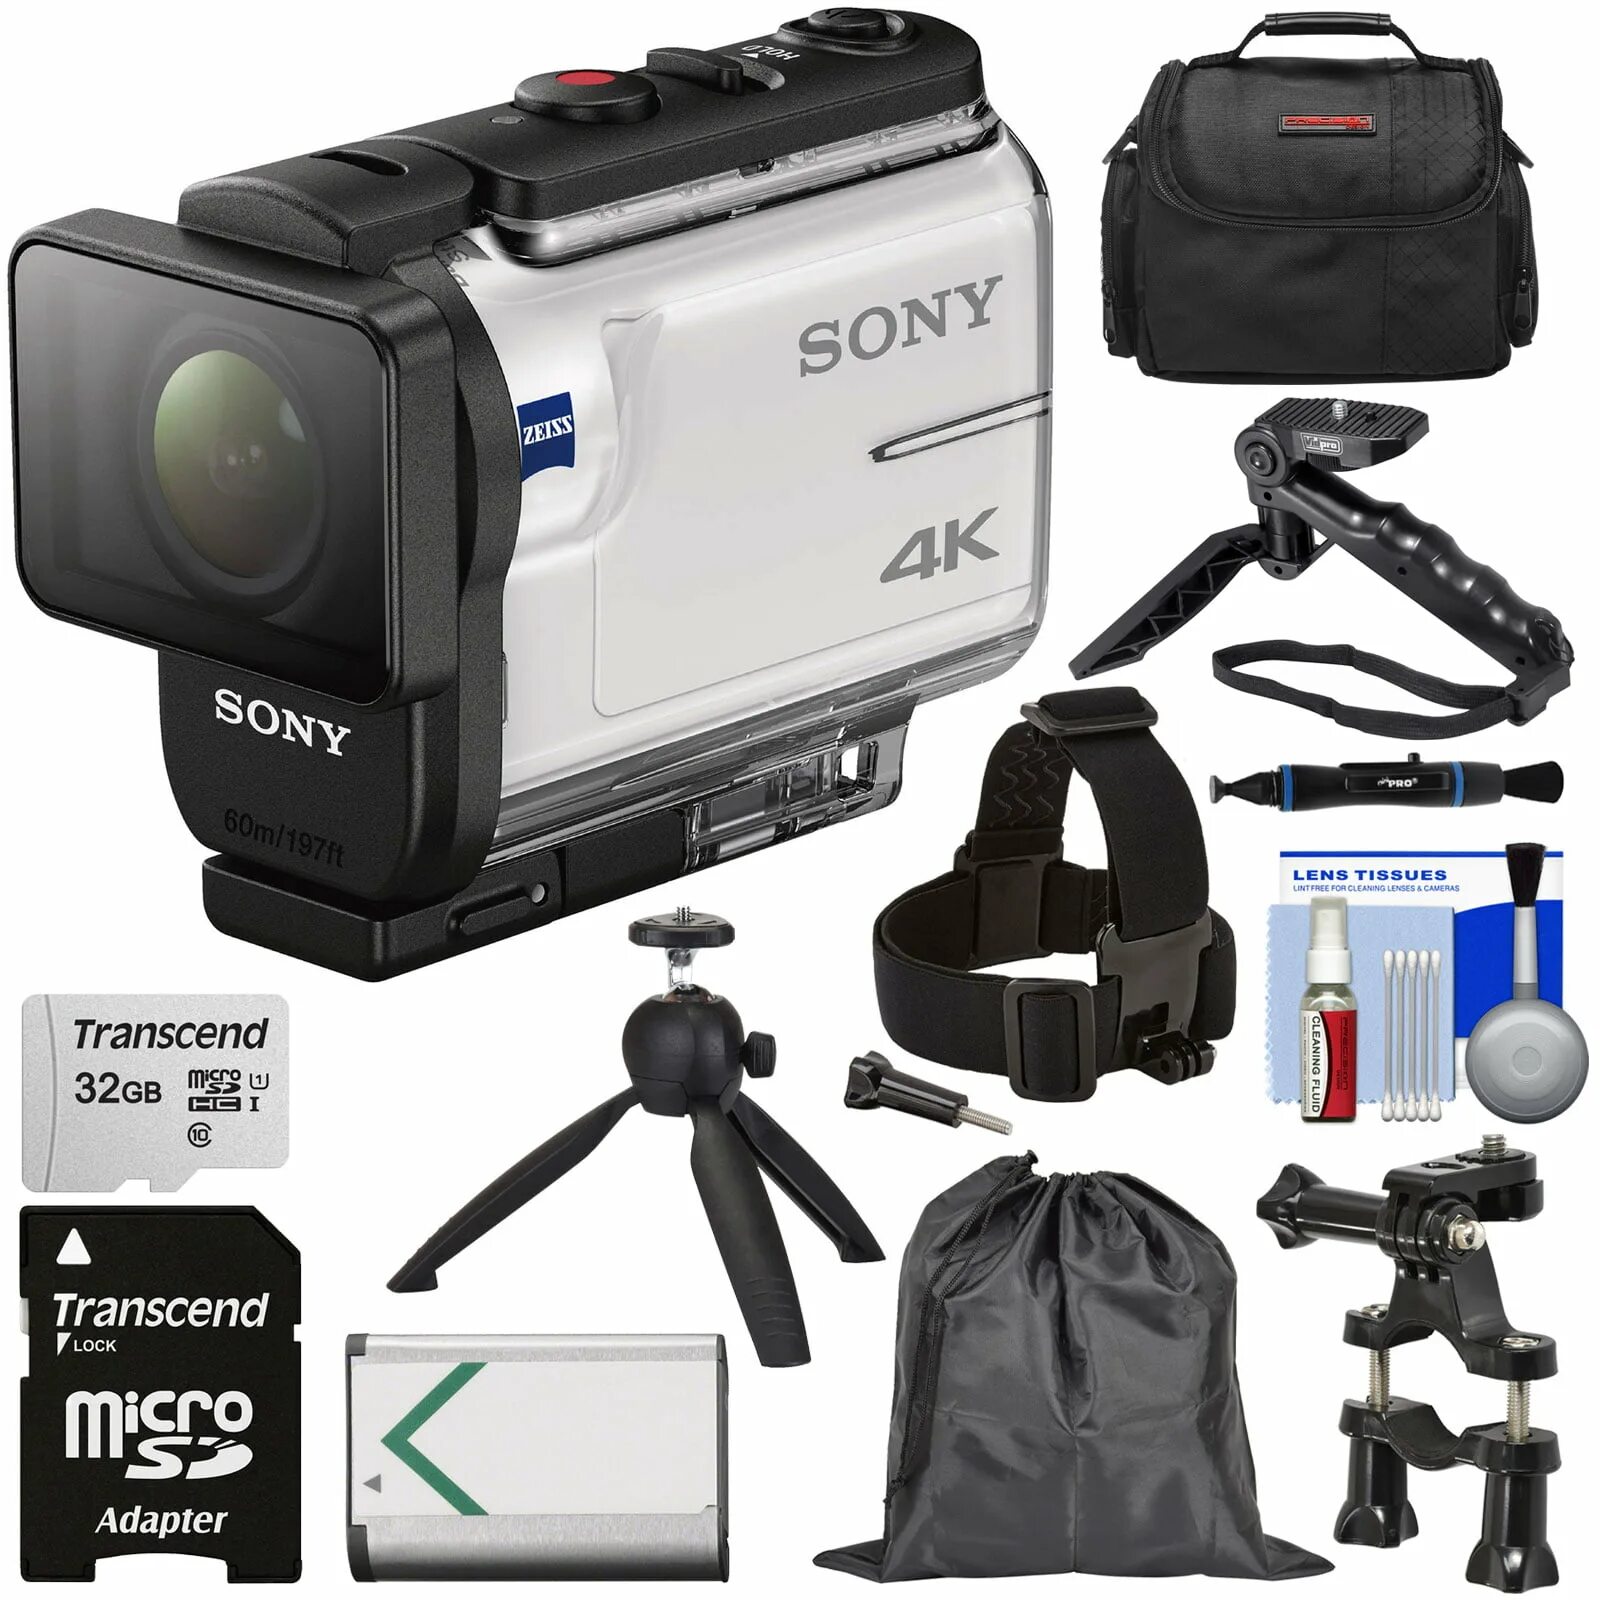 Sony Action cam FDR-x3000. Sony HDR 3000. Sony FDR x3000 кейс.